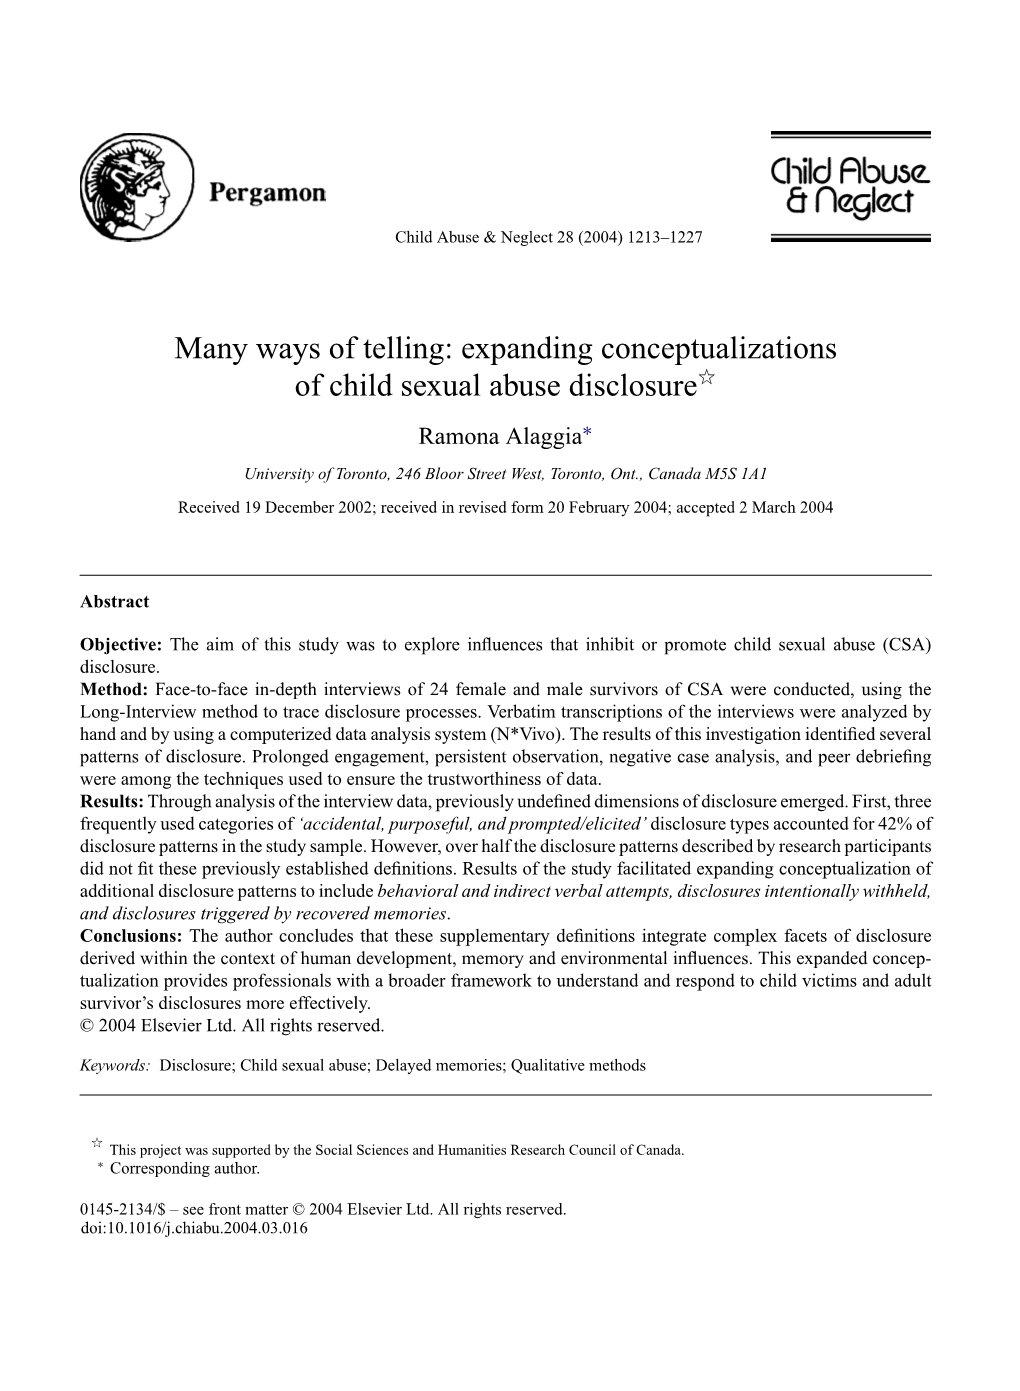 Expanding Conceptualizations of Child Sexual Abuse Disclosure